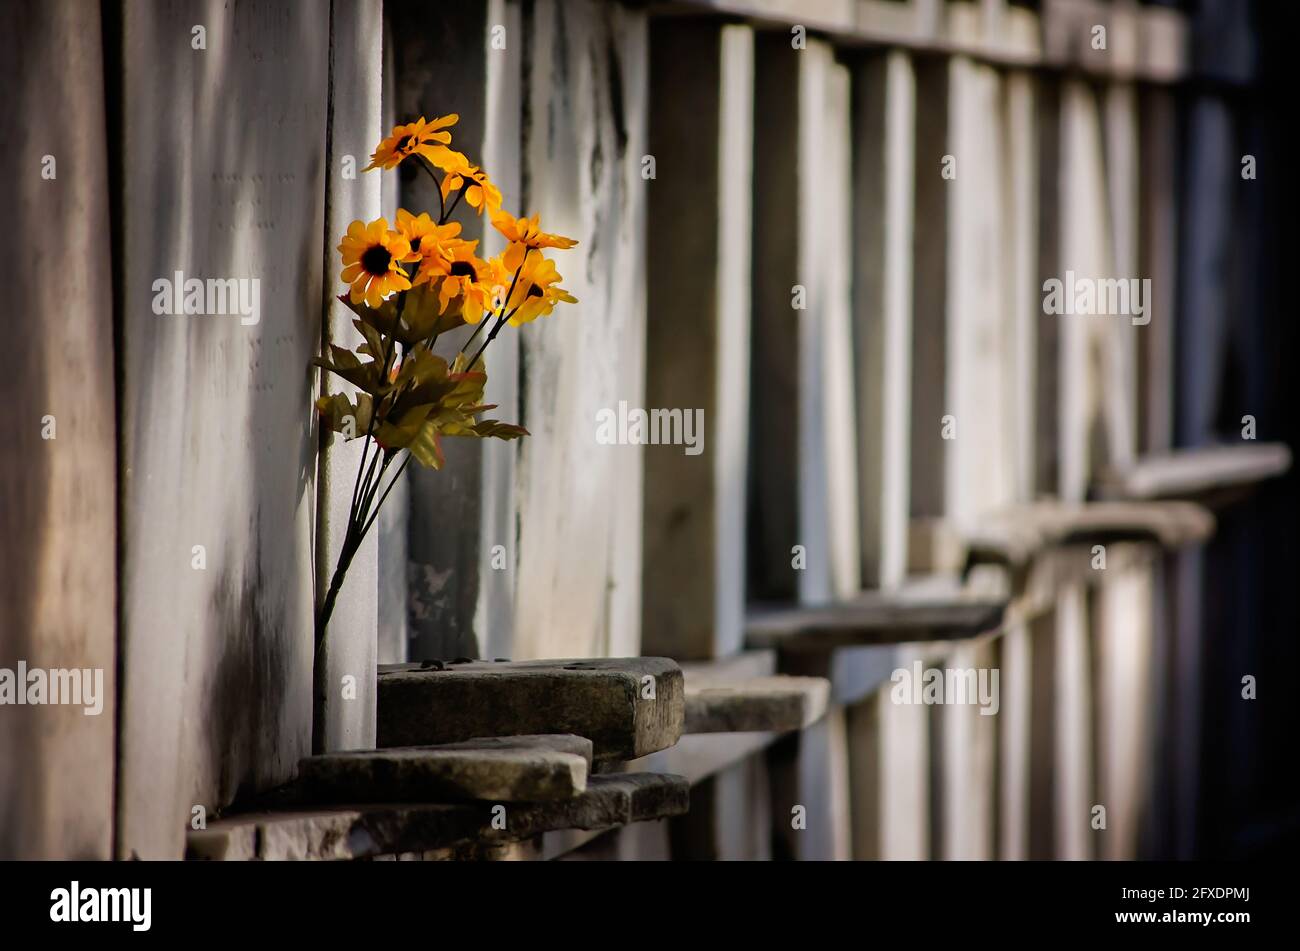 Flowers are inserted into a wall of oven vaults at Odd Fellows Rest Cemetery, Nov. 14, 2015, in New Orleans, Louisiana. Stock Photo